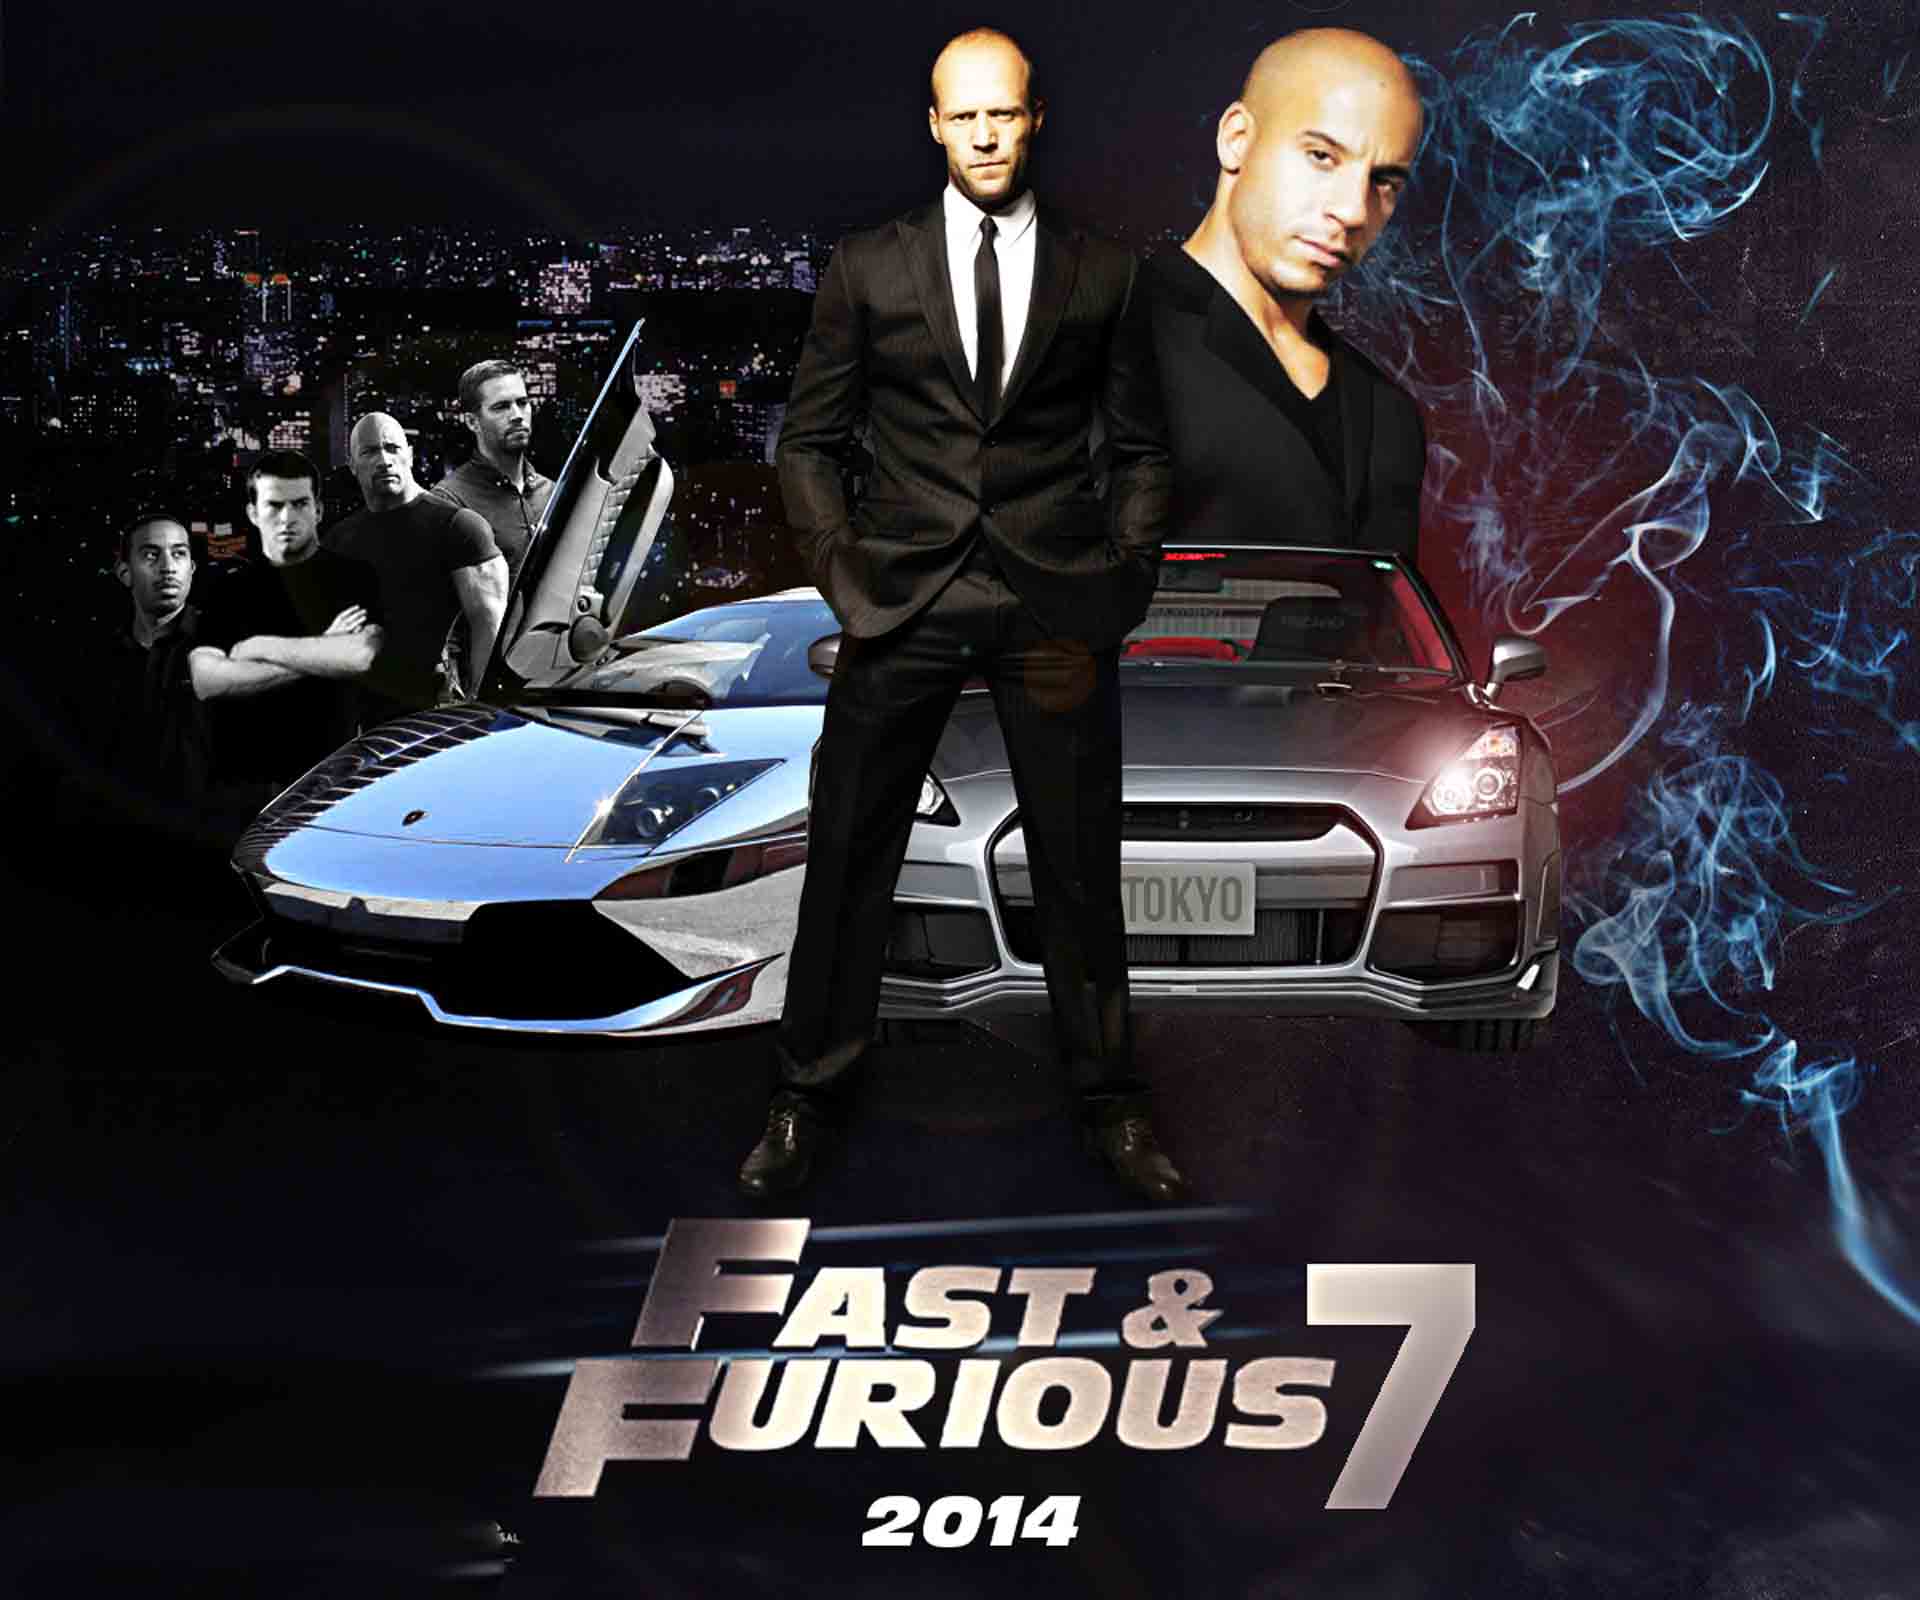 Fast and furious 5 wallpaper